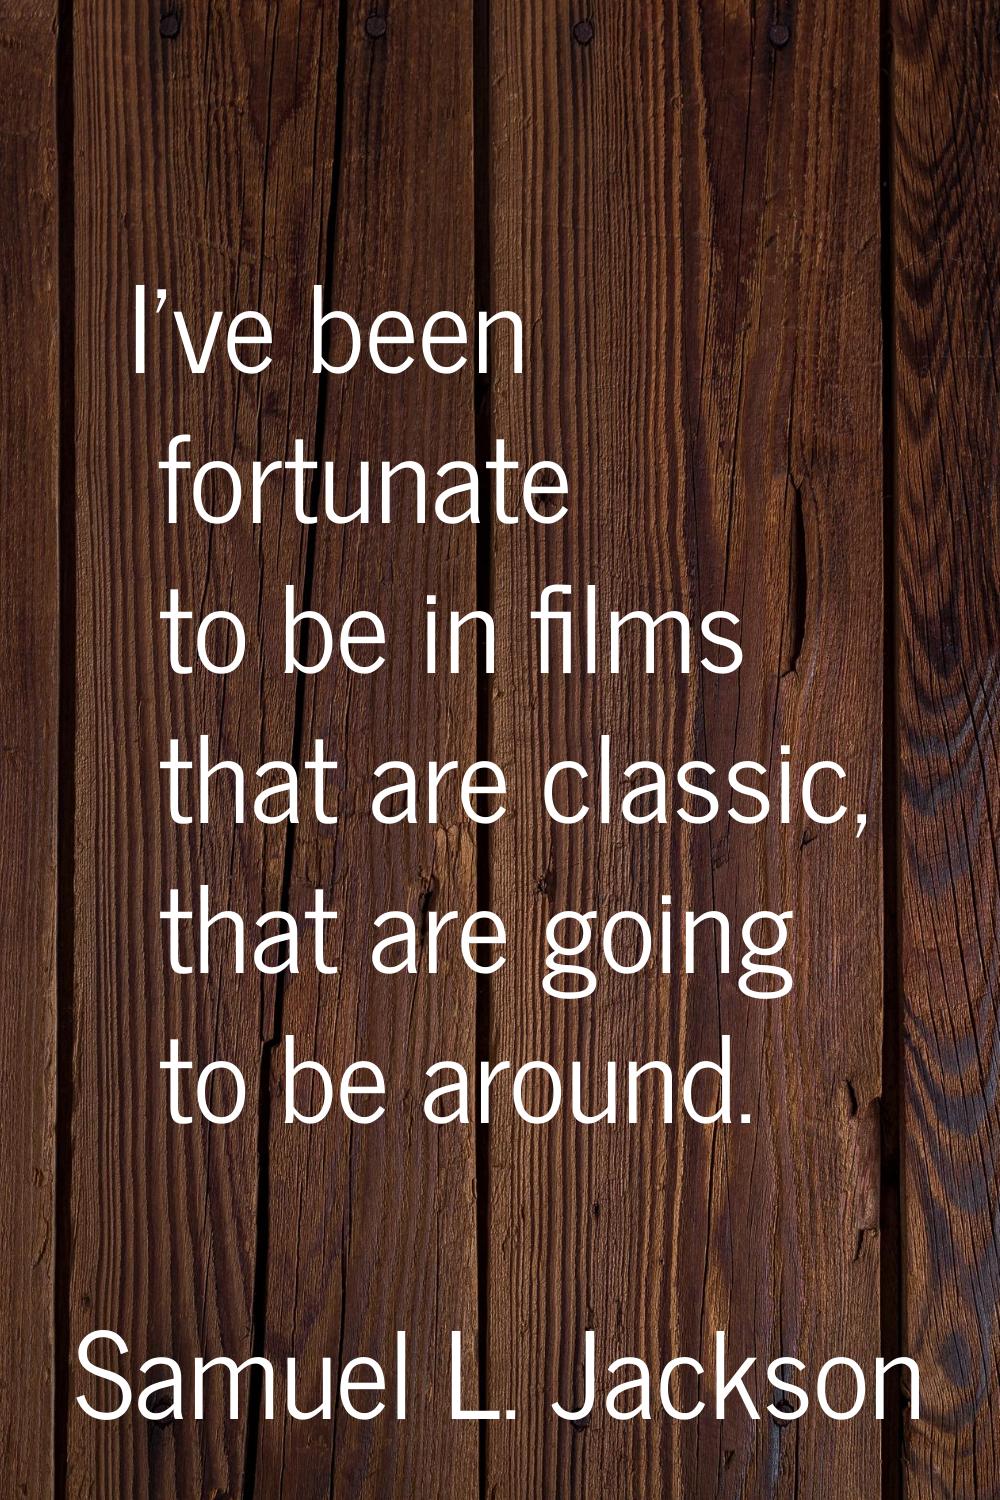 I've been fortunate to be in films that are classic, that are going to be around.